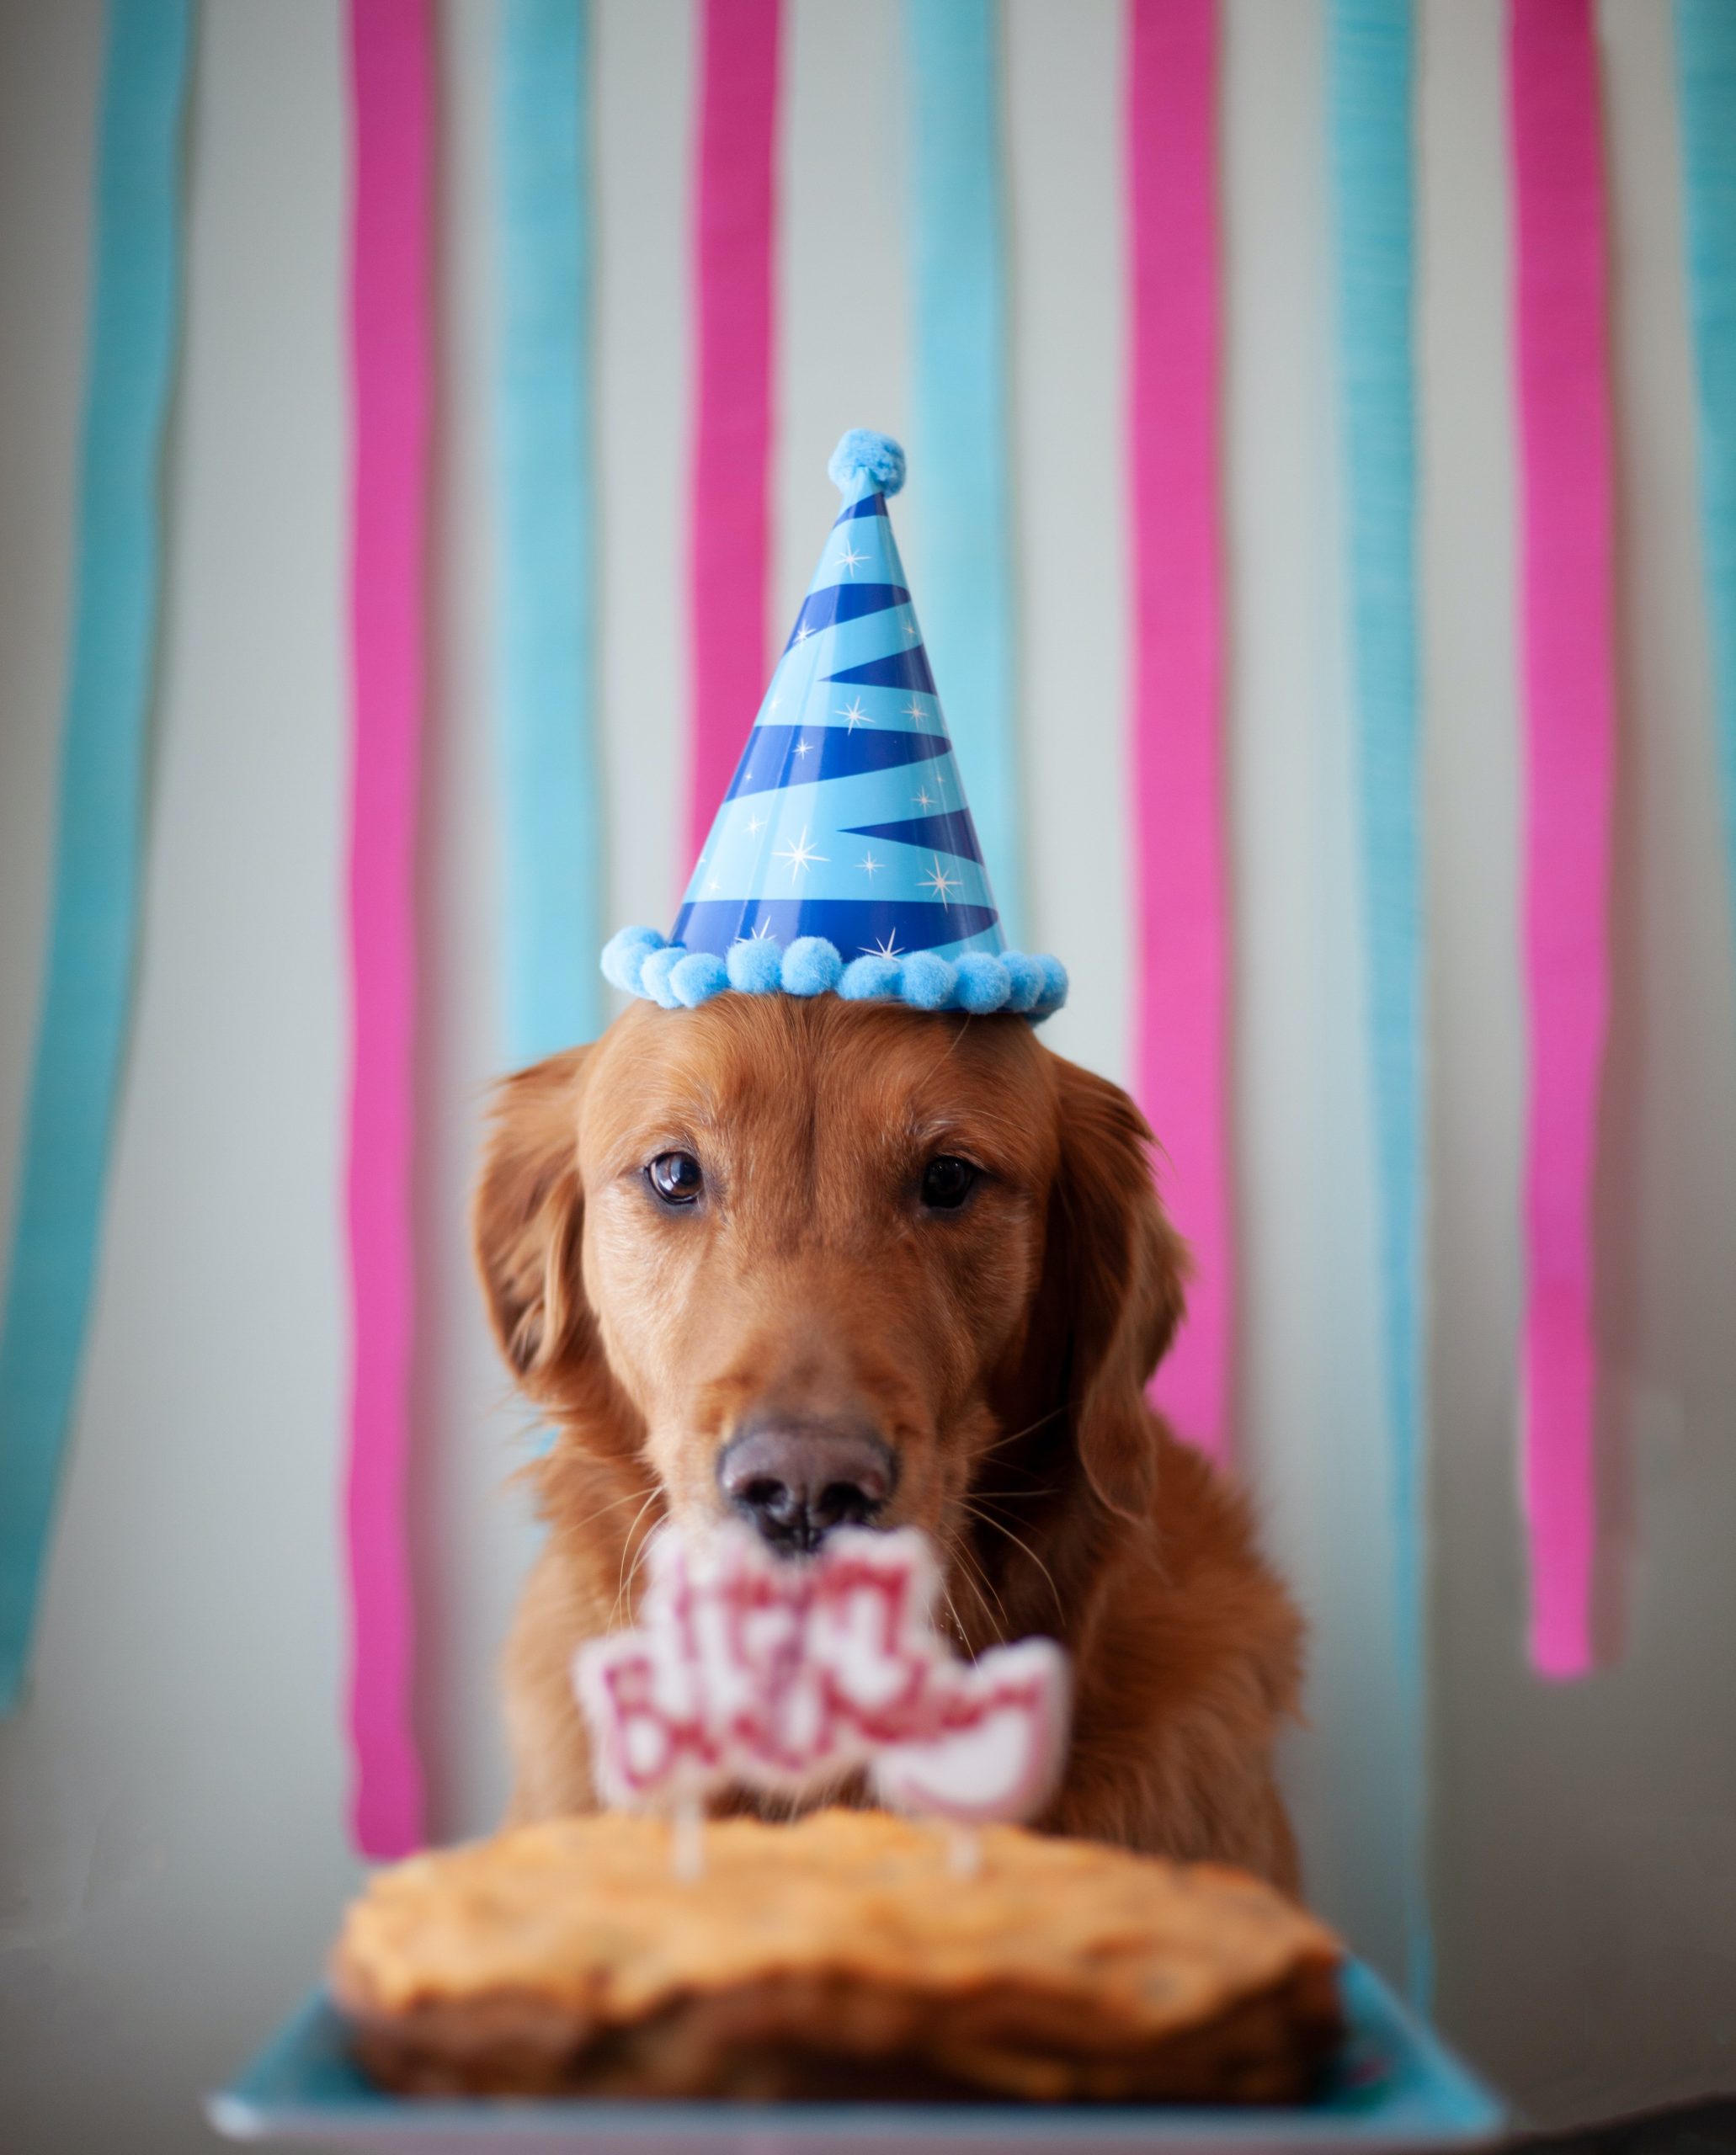 The Emotional and Social Benefits of Celebrating Your Dogs Birthday